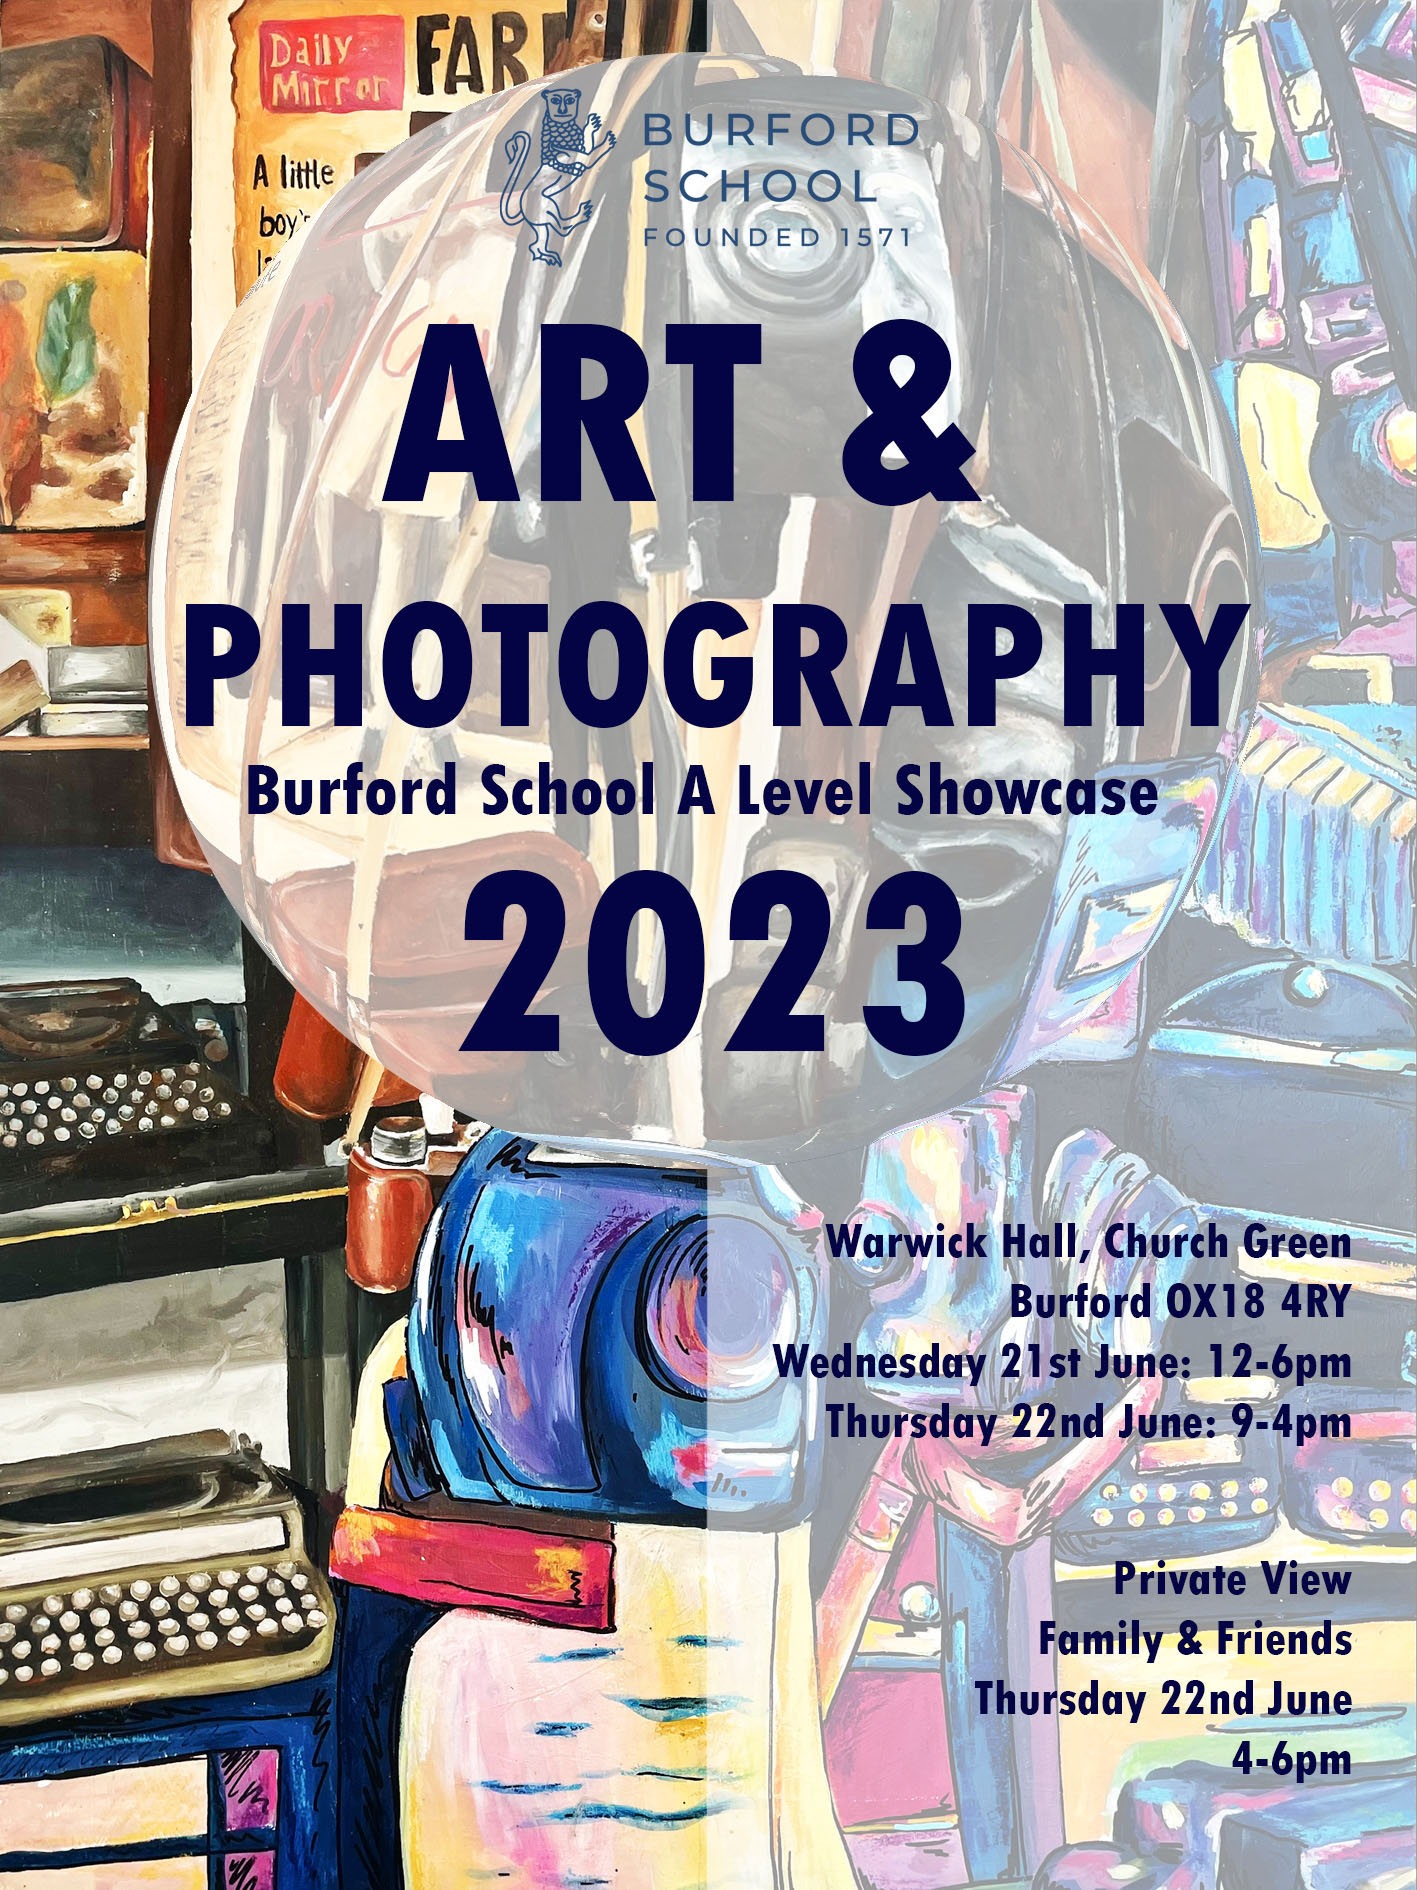 Burford School Art and Photography A Level Showcase 2023